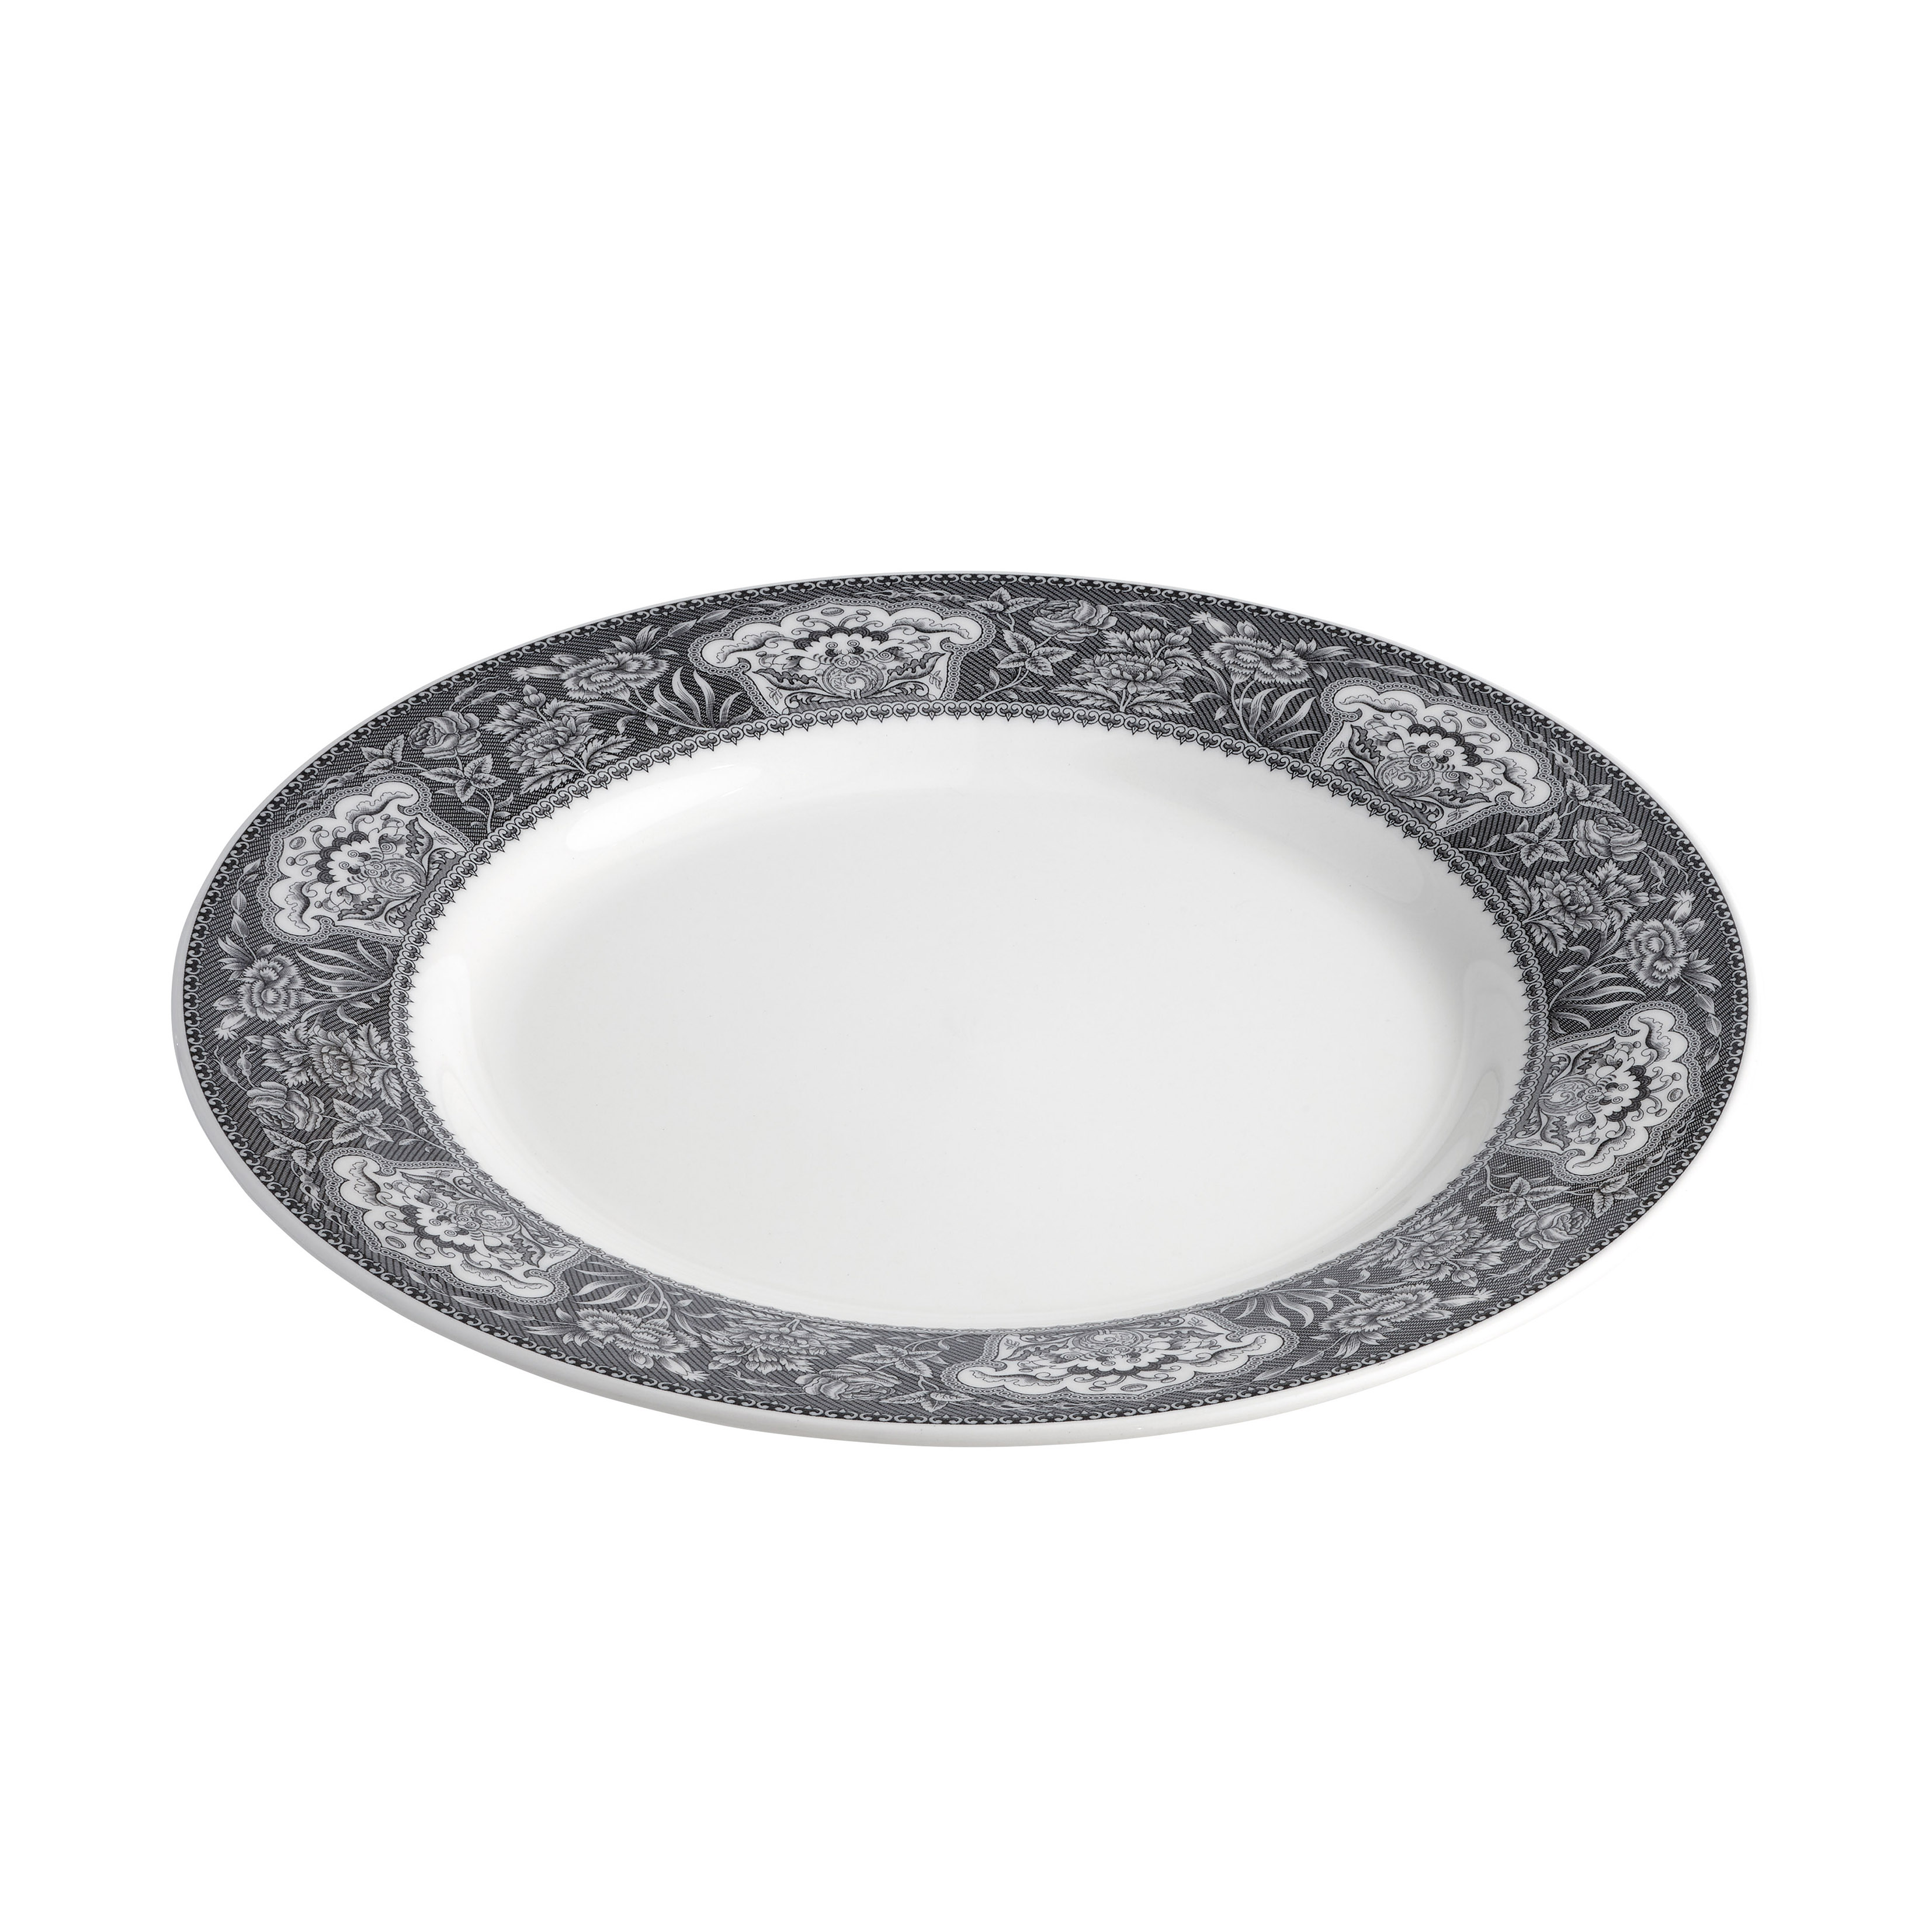 Heritage 11 Inch Dinner Plate, Floral image number null